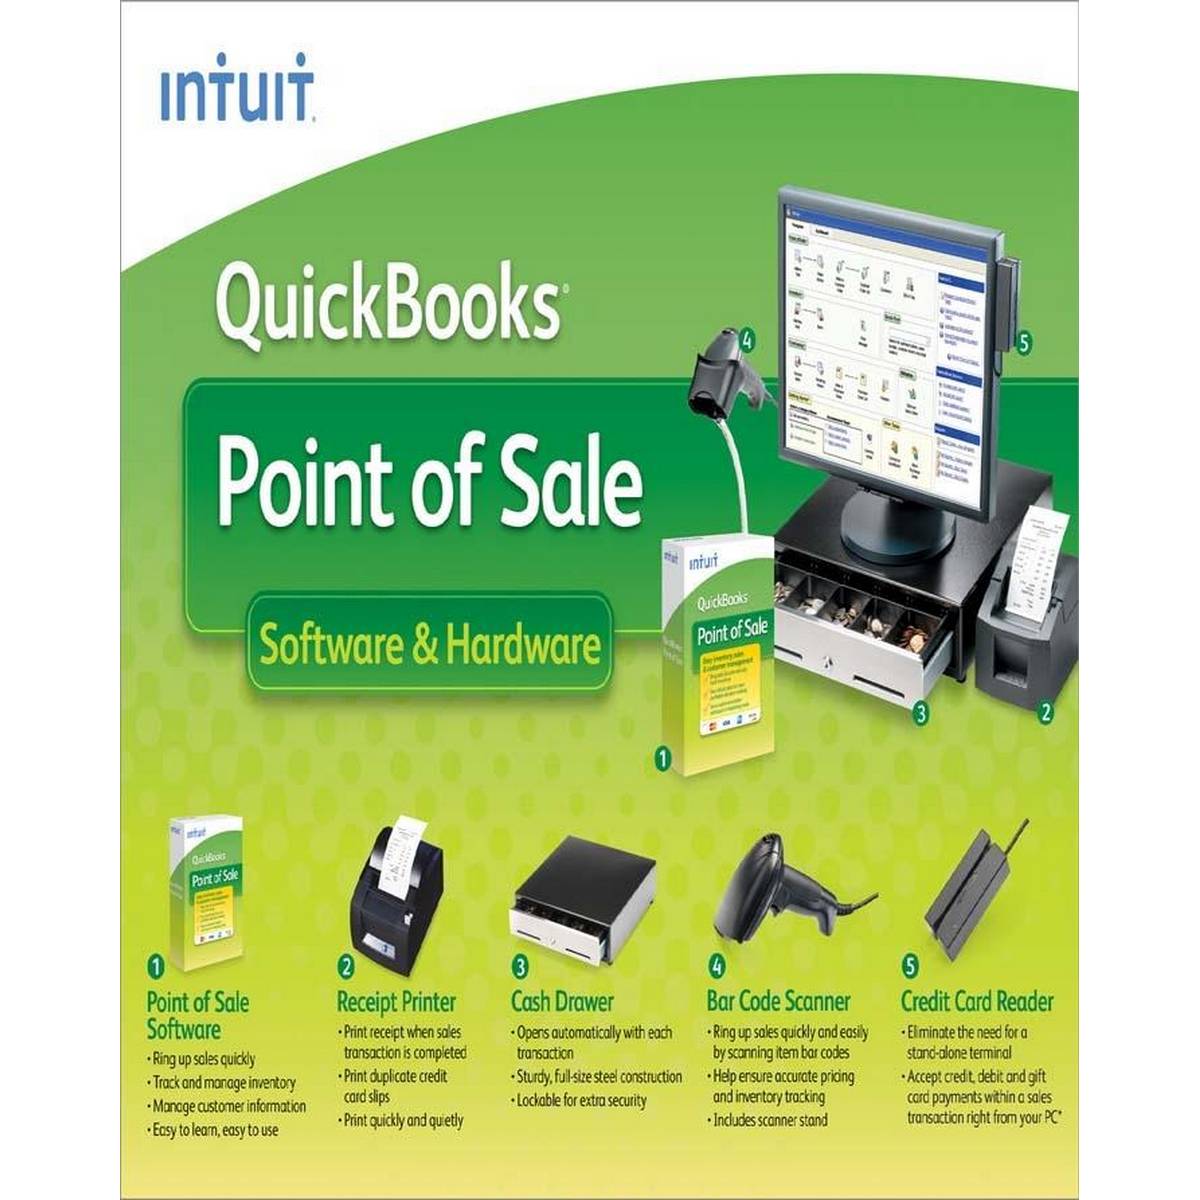 intuit pos system hardware